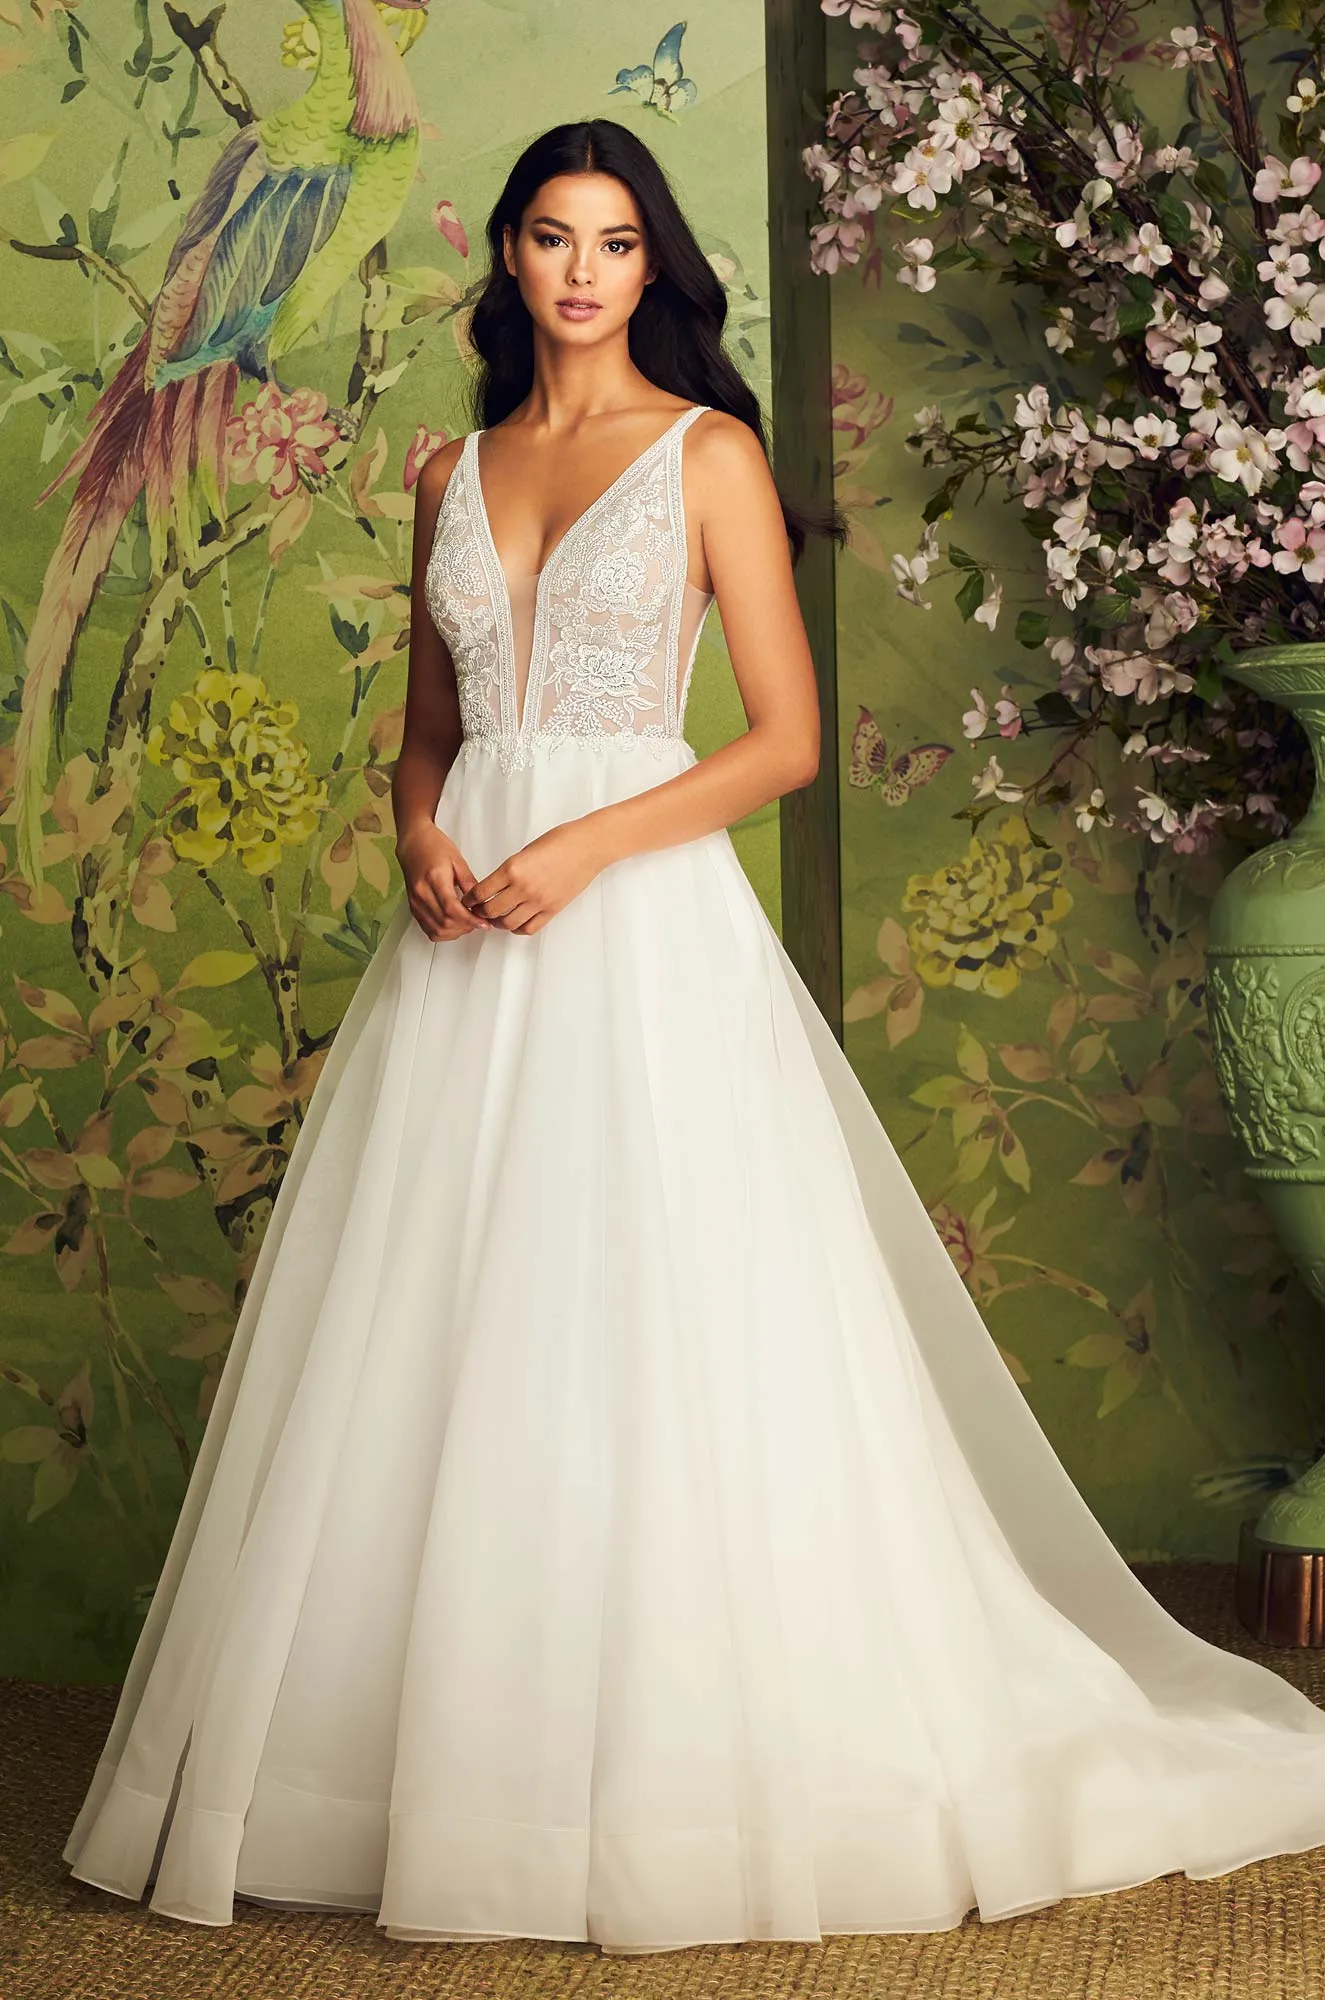 Bridal Gowns and Body Types – A Southern California Wedding & Event Planner